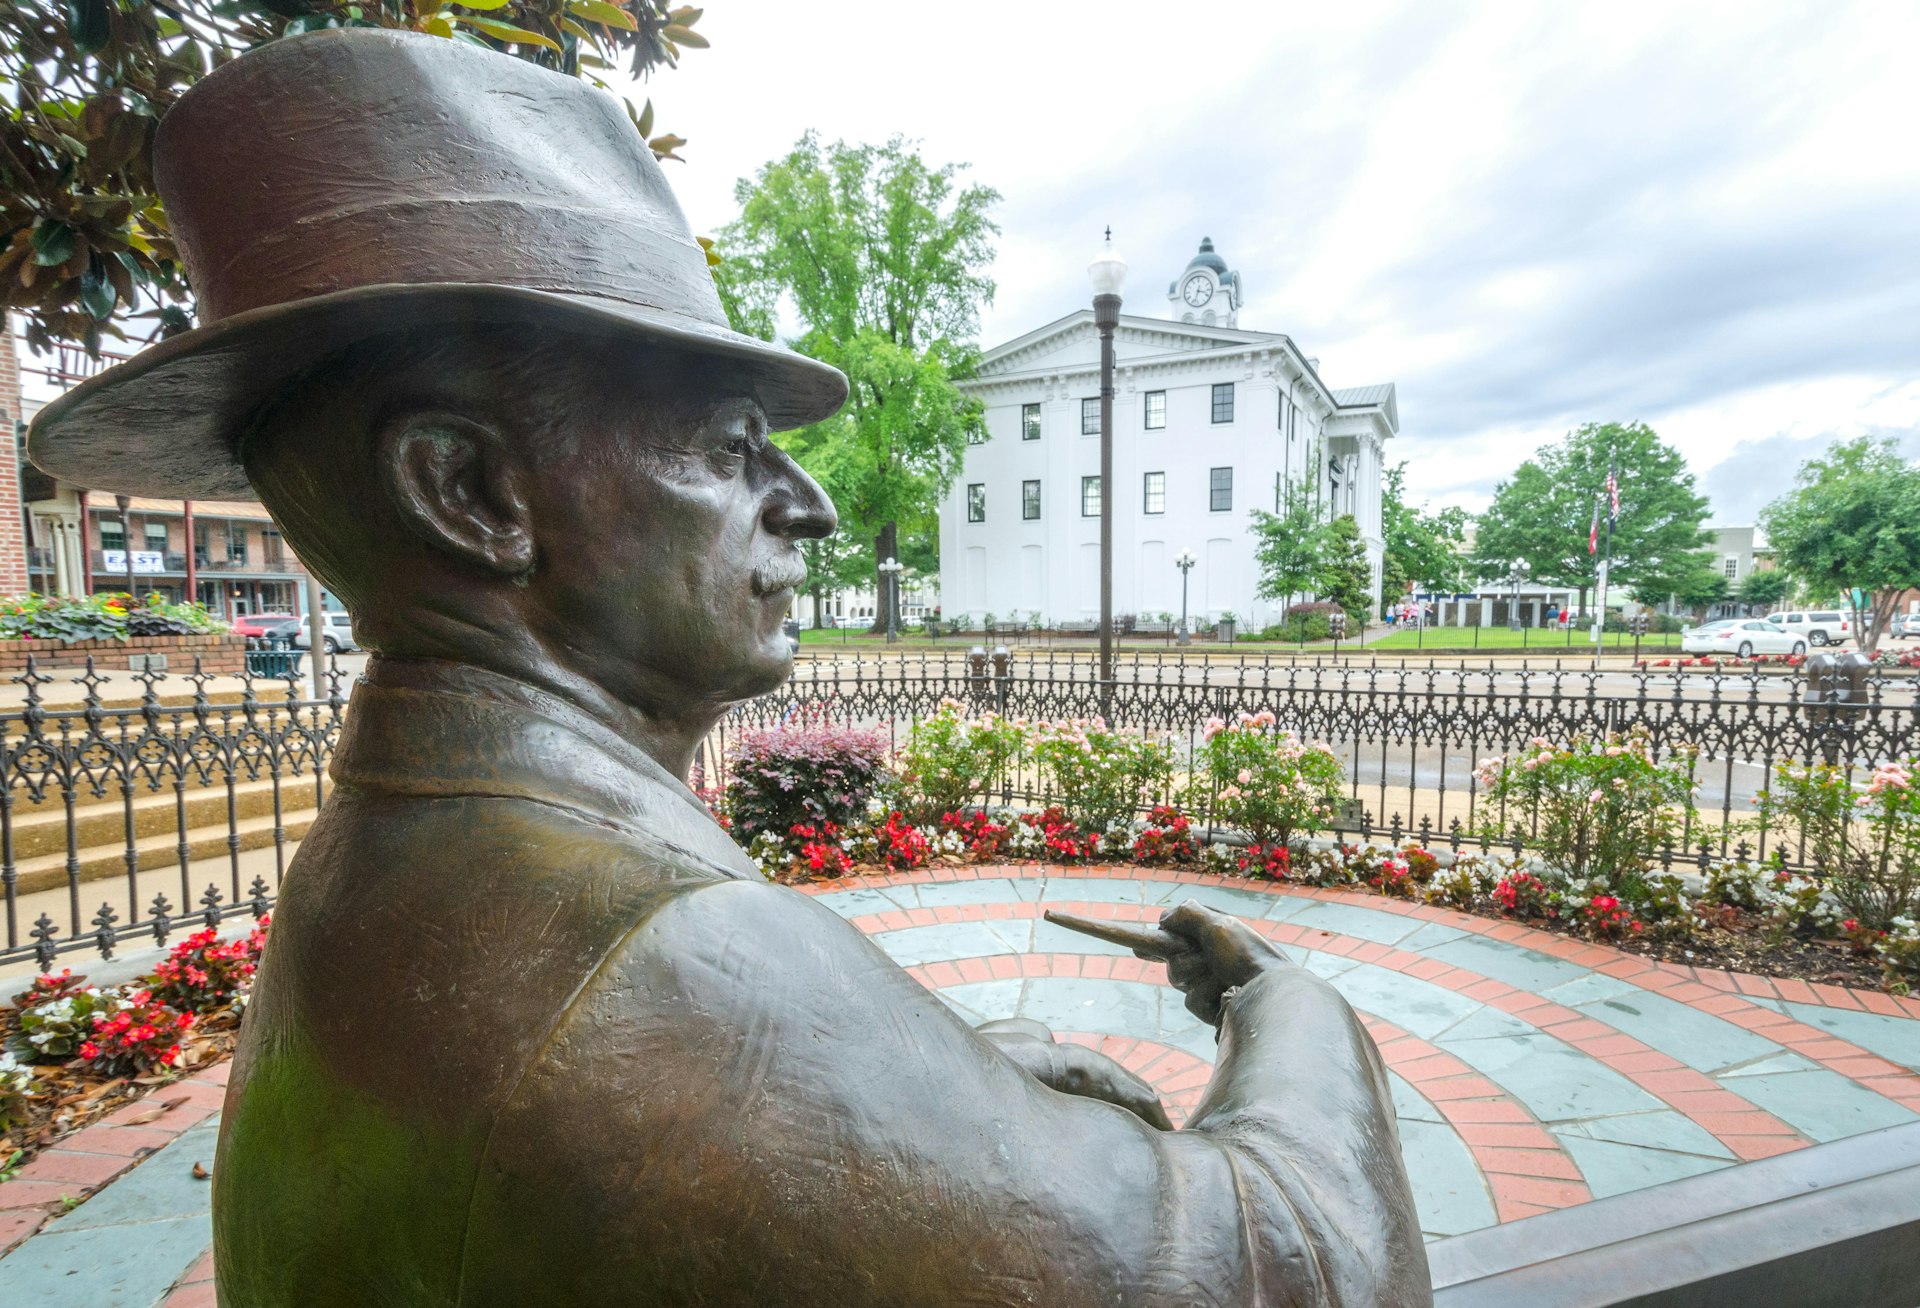 A bronze statue of William Faulkner looks out over Courthouse Square, May 31, 2015, in Oxford, Mississippi.